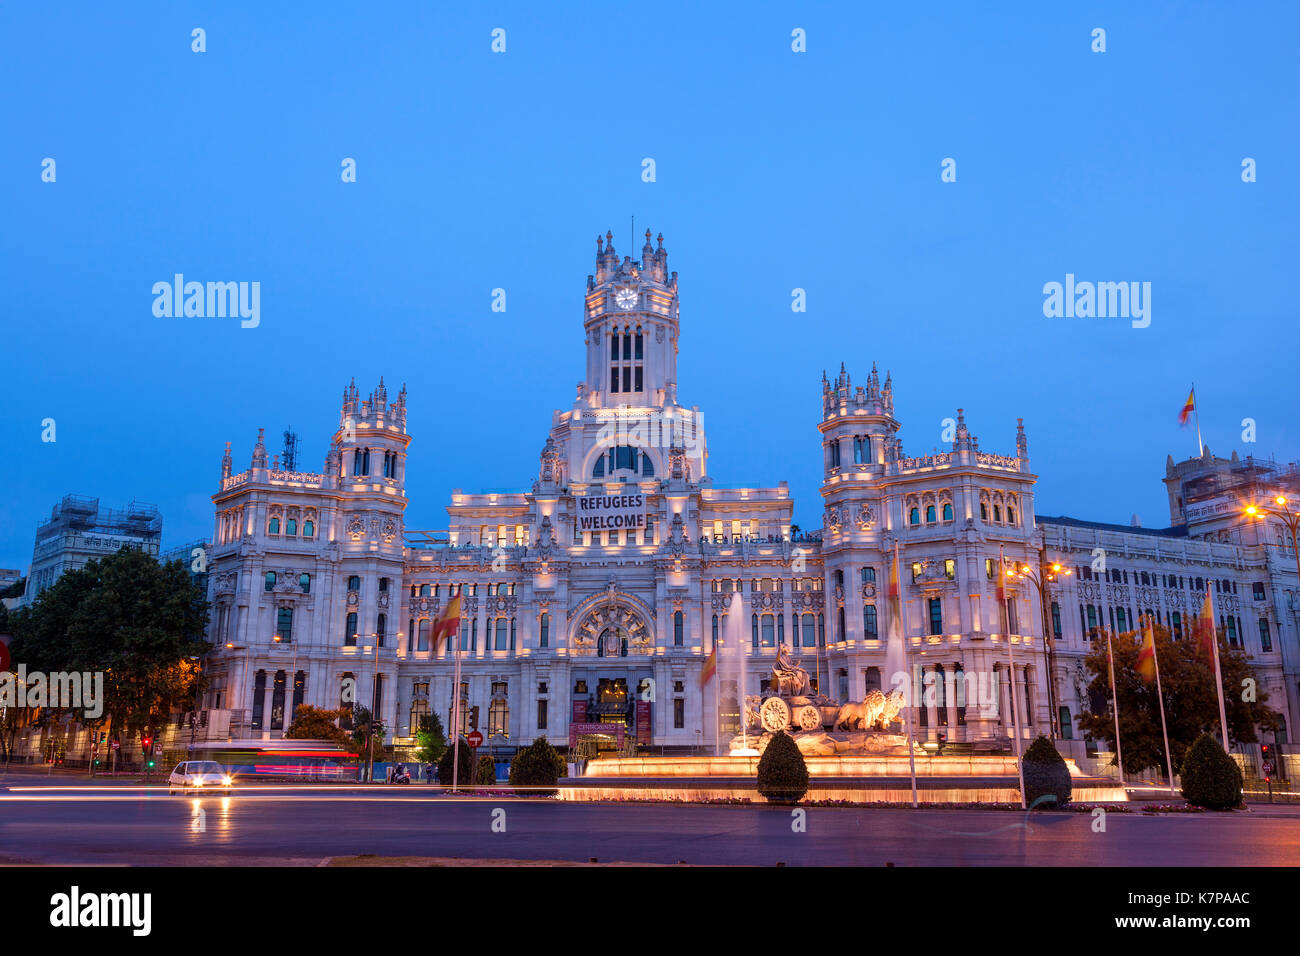 The Cibeles square in Madrid, Spain. There is the Palacio de Cibeles (Palace of Cybele) and the fountain of the goddess Cybele. Stock Photo